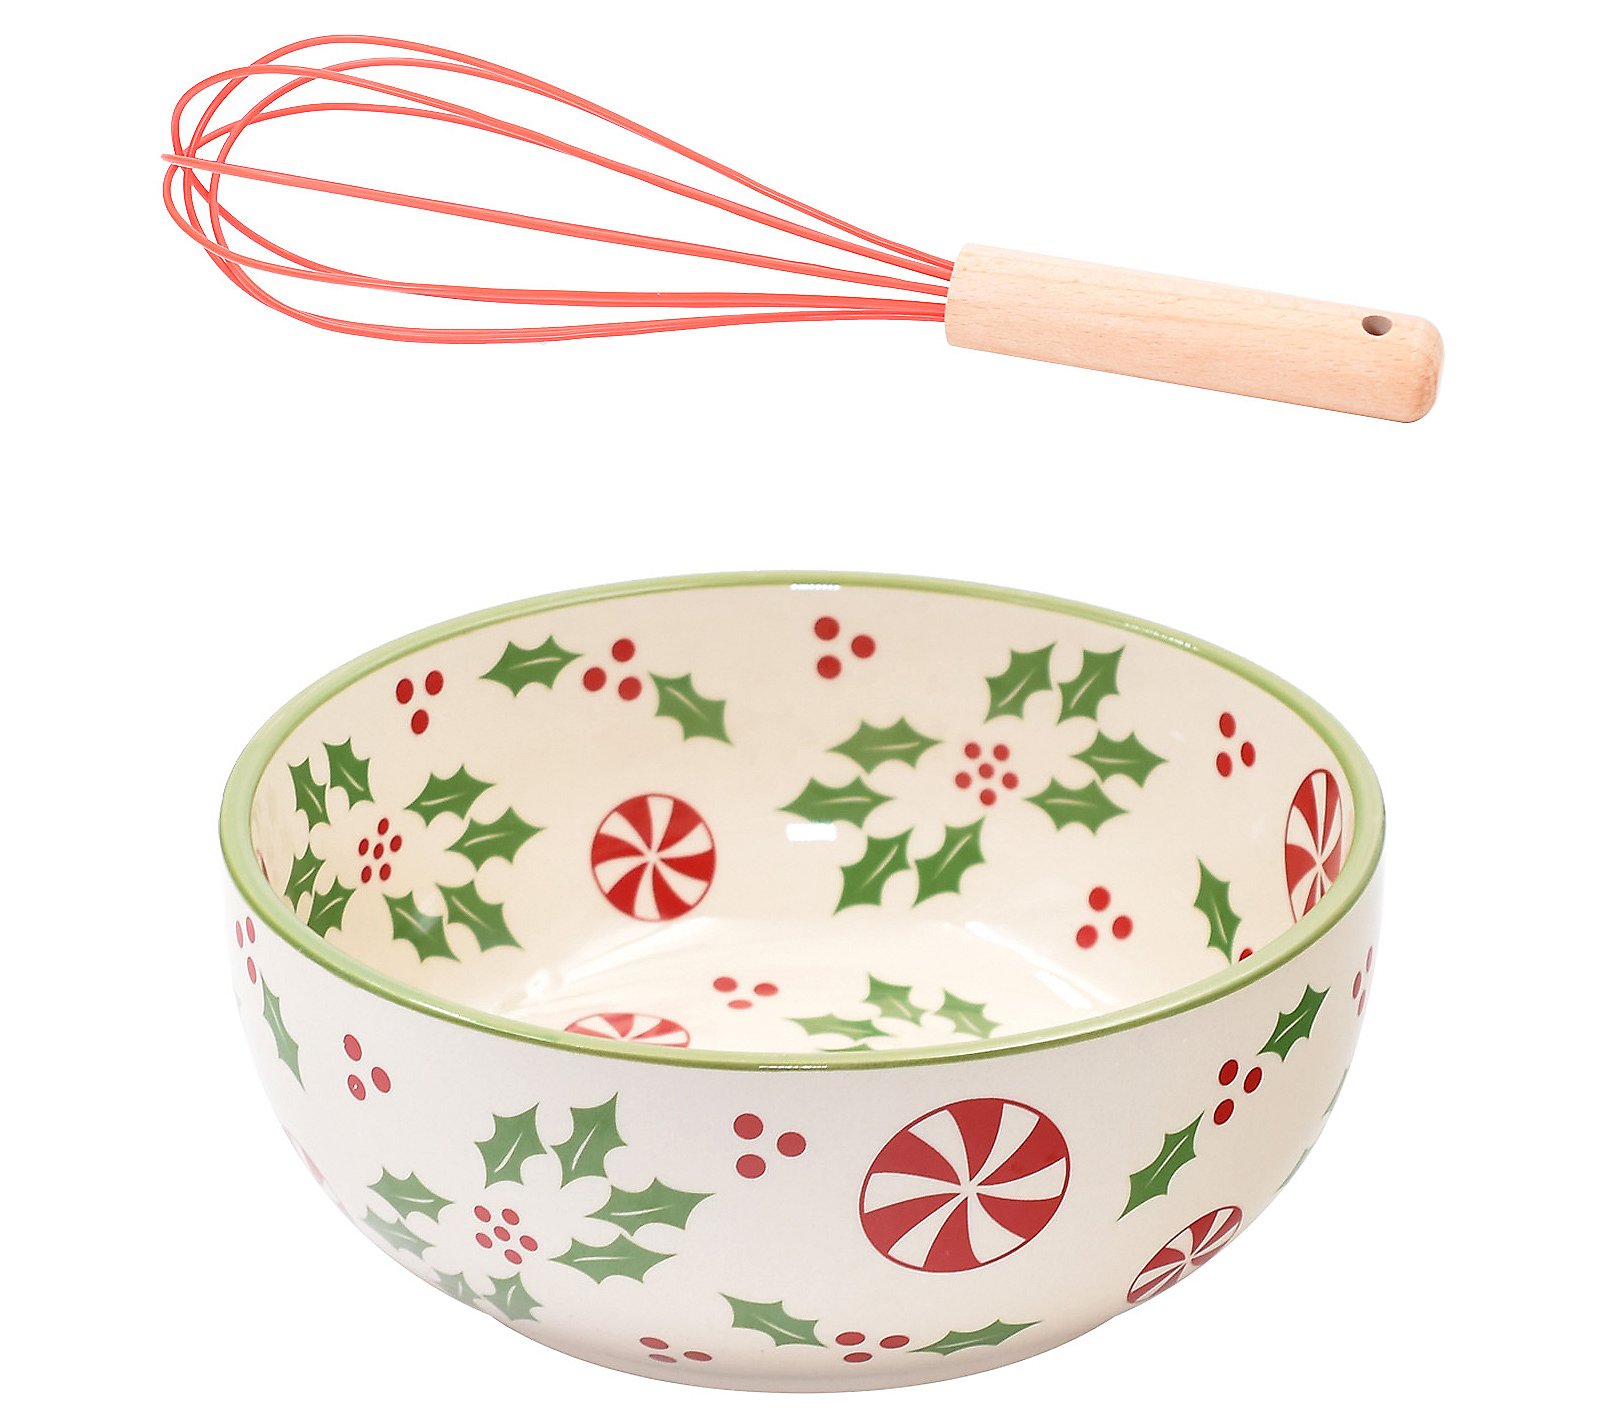 Temp-tations 2qt Bowl with Whisk